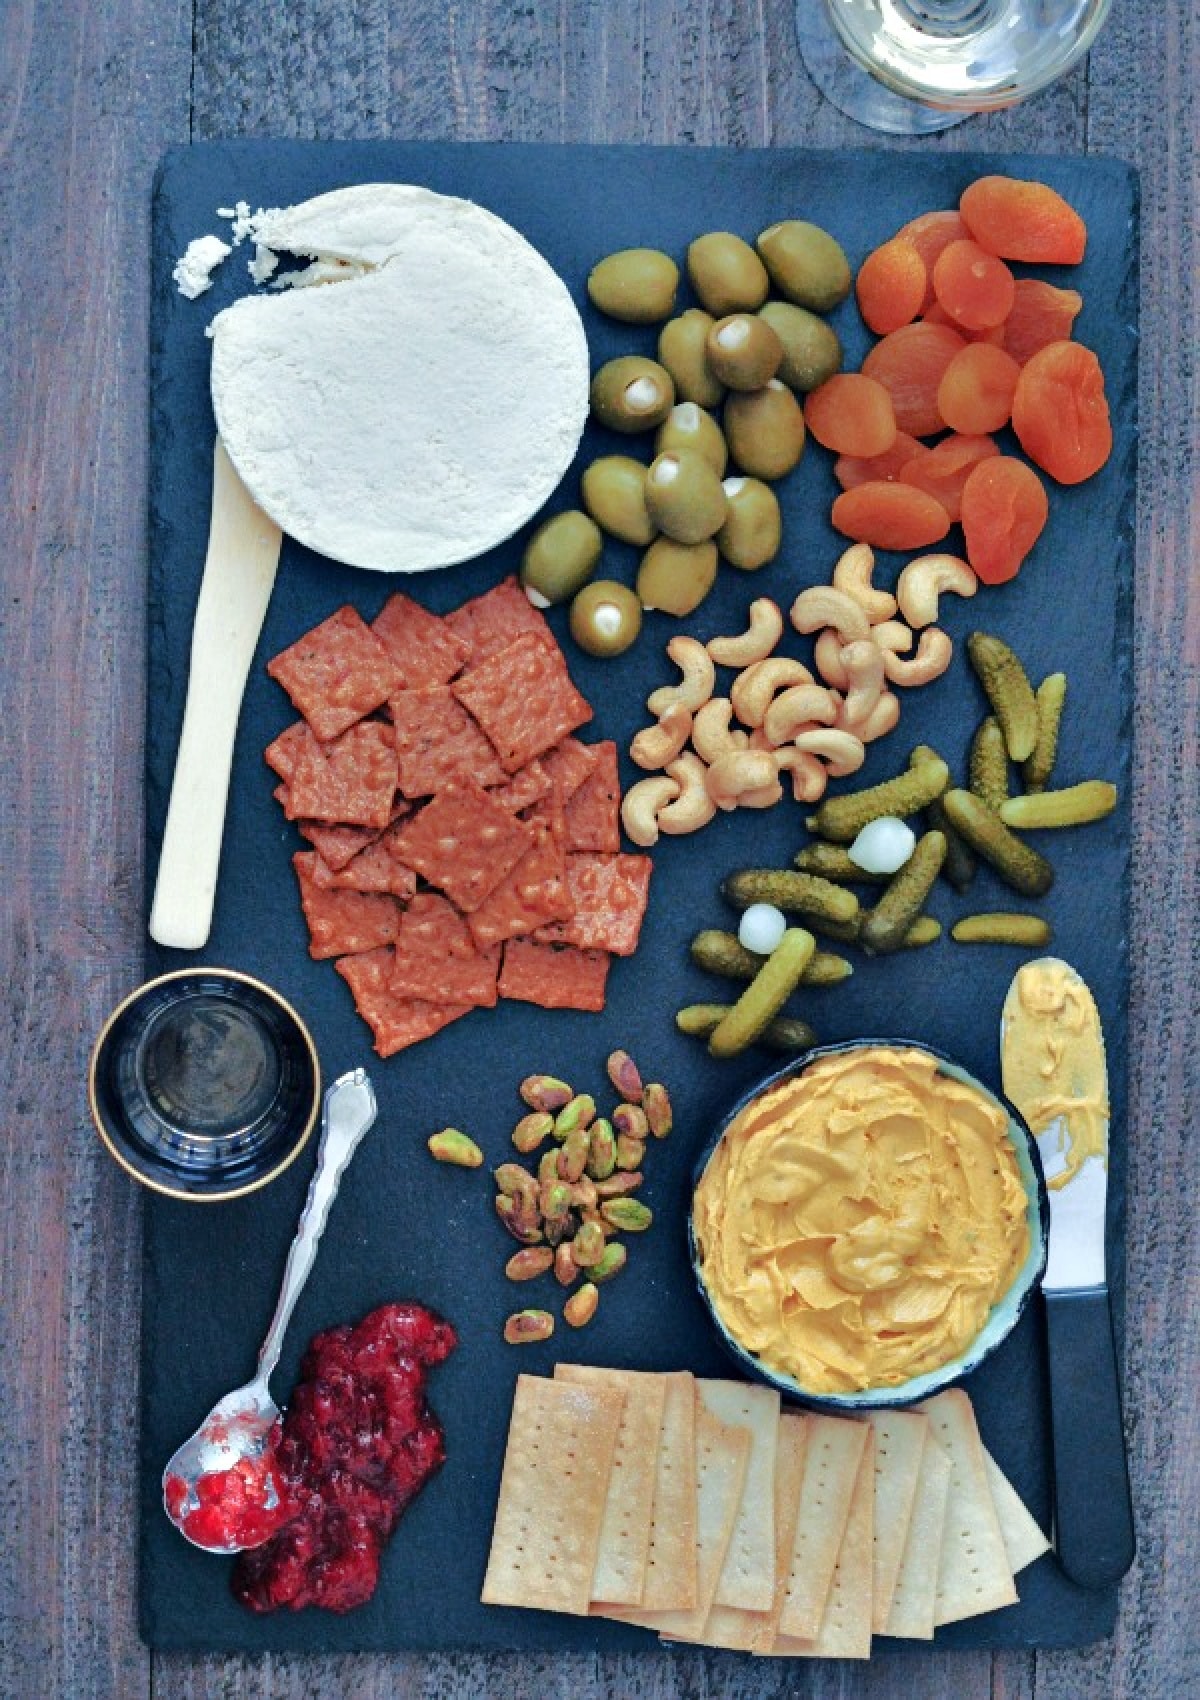 Overhead view of a wheel of vegan brie cheese on a slate board with crackers, olives, nuts, and veggies.